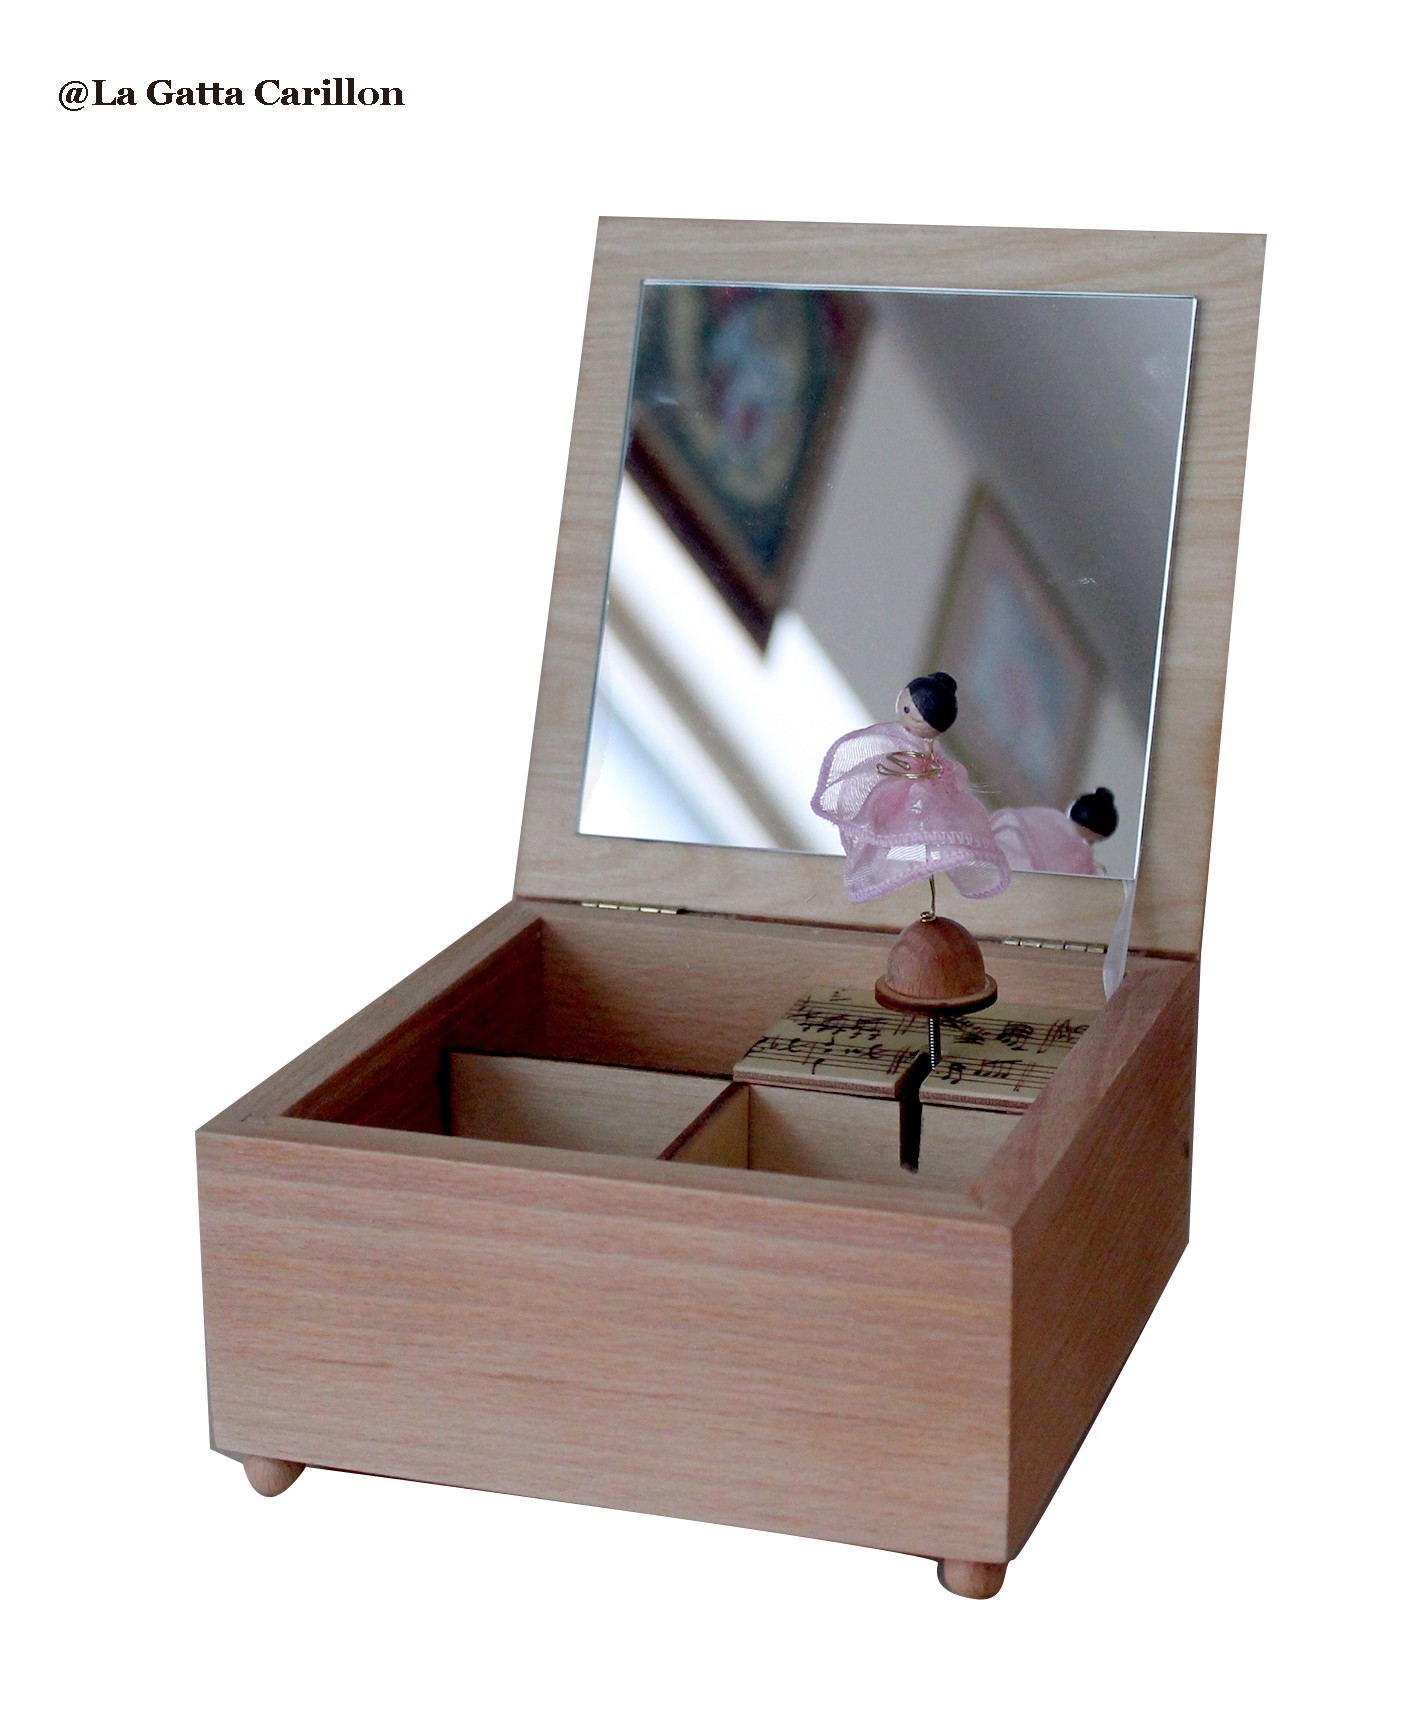 custom musical jewelry box. Wooden music box with custom decoration,  dedication and melody.